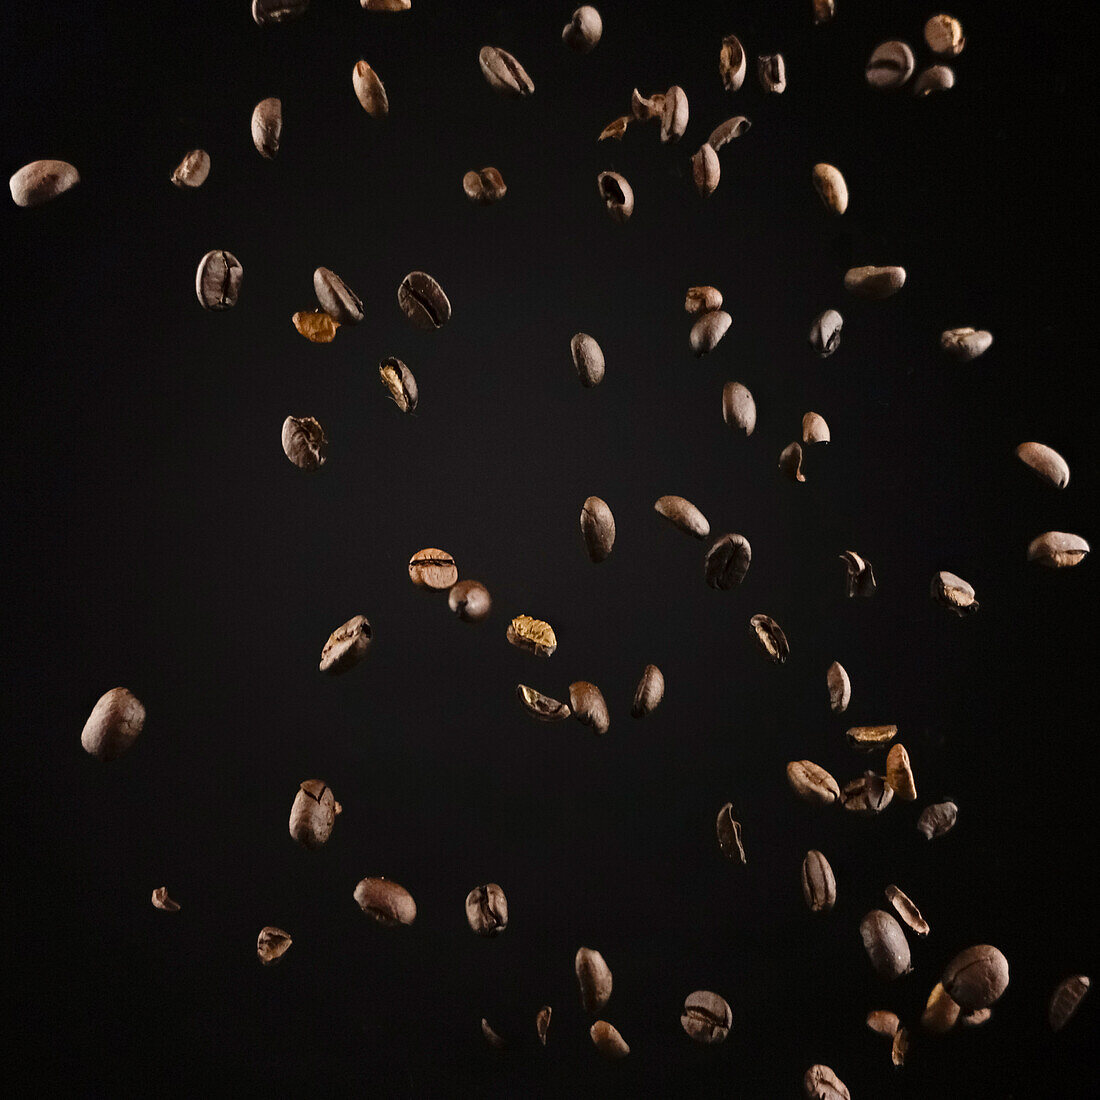 Fragrant roasted coffee beans falling against dark backdrop as concept of ingredient for tasty hot drink